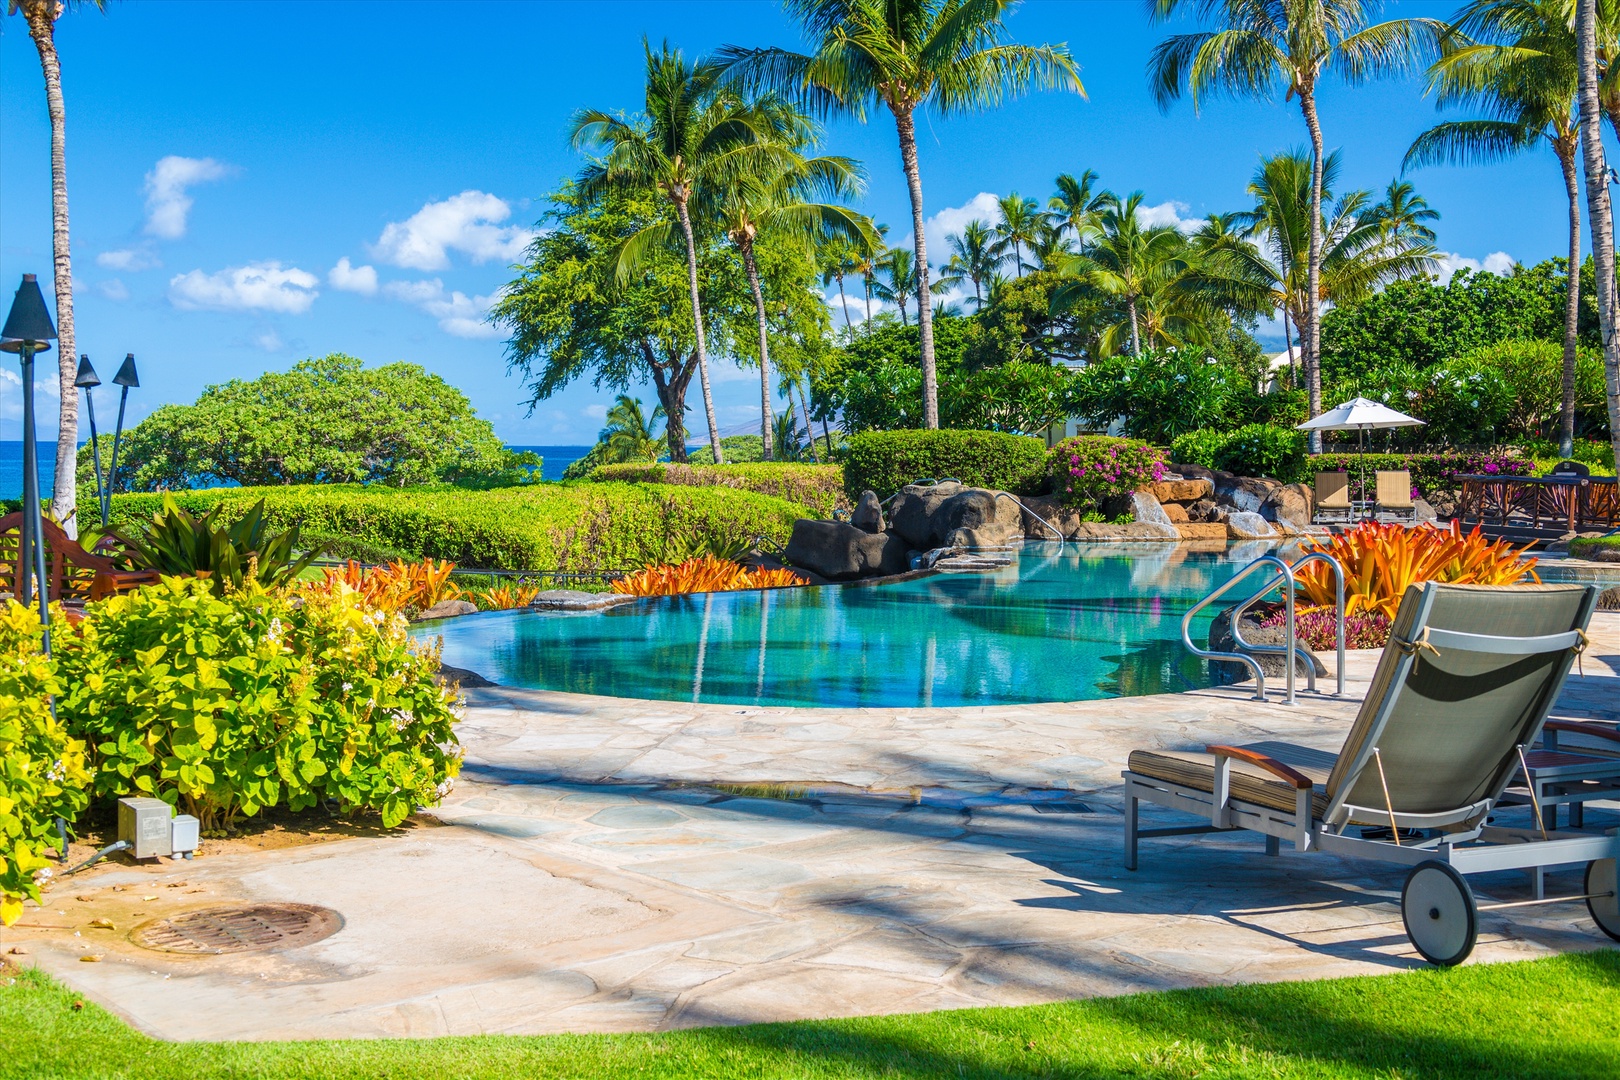 Wailea Vacation Rentals, Blue Ocean Suite H401 at Wailea Beach Villas* - Relax and Cool Off at the Oceanside Adult Only Pool